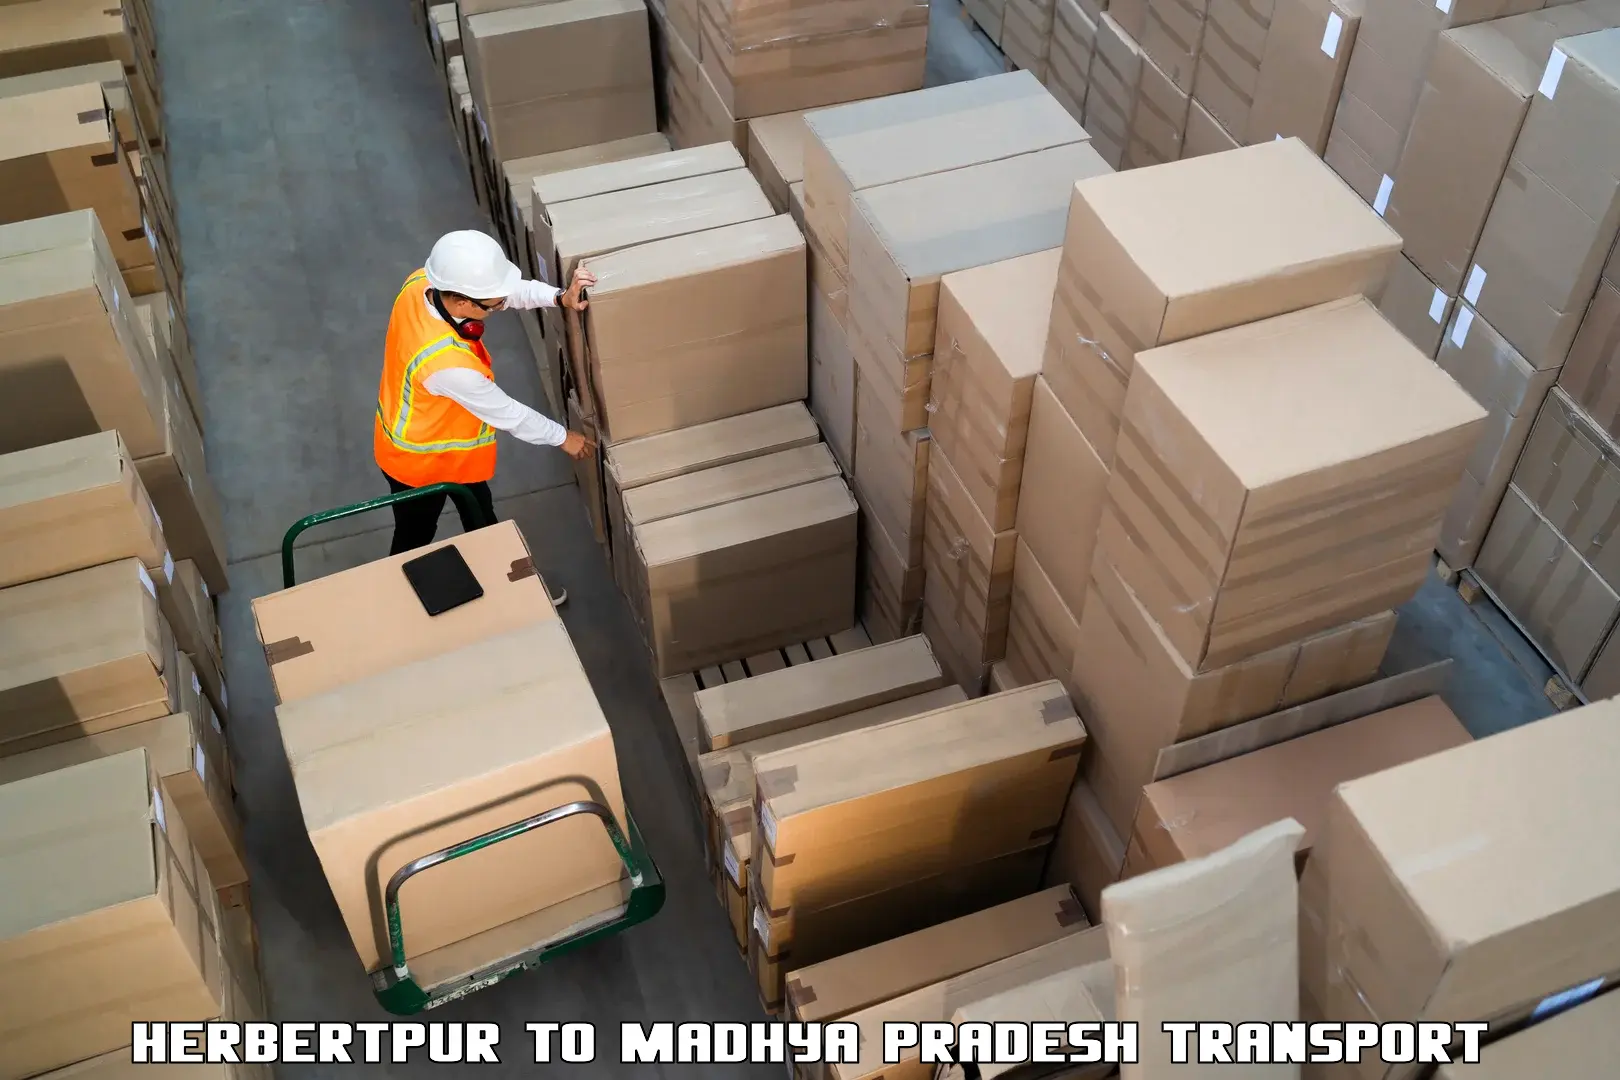 Air freight transport services Herbertpur to Udaipura